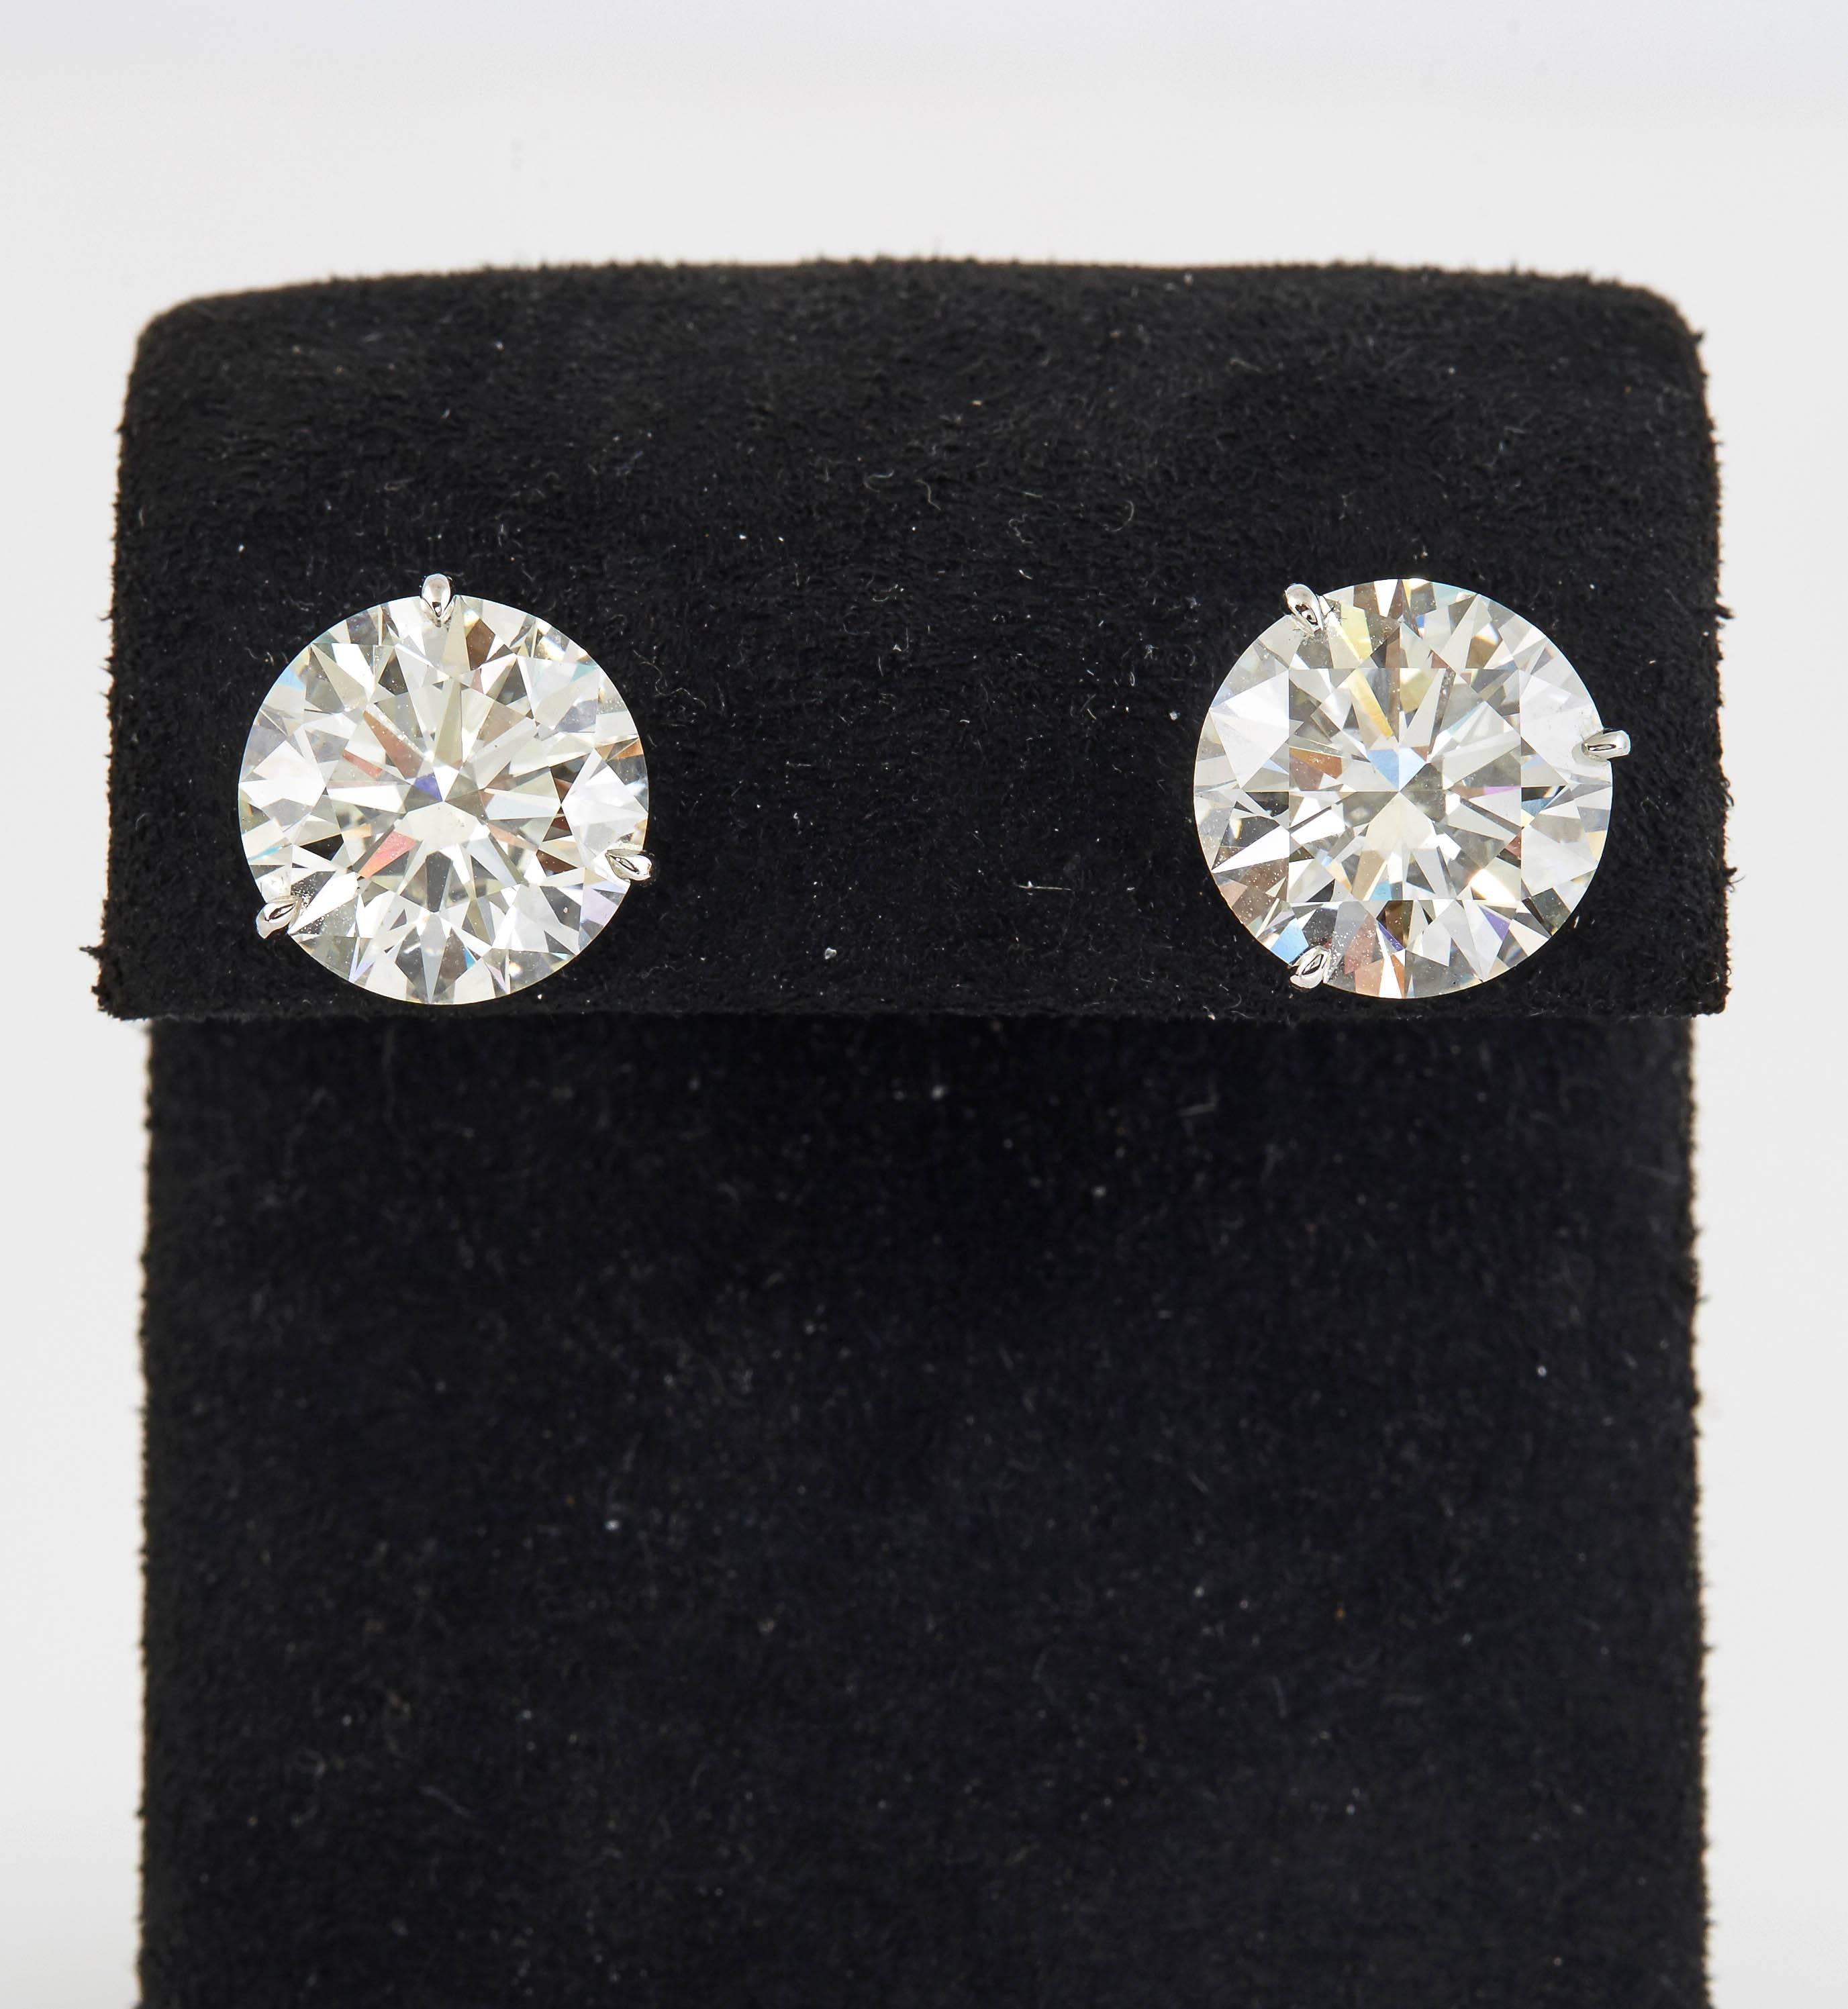 Diamond stud earrings, finely crafted in platinum 